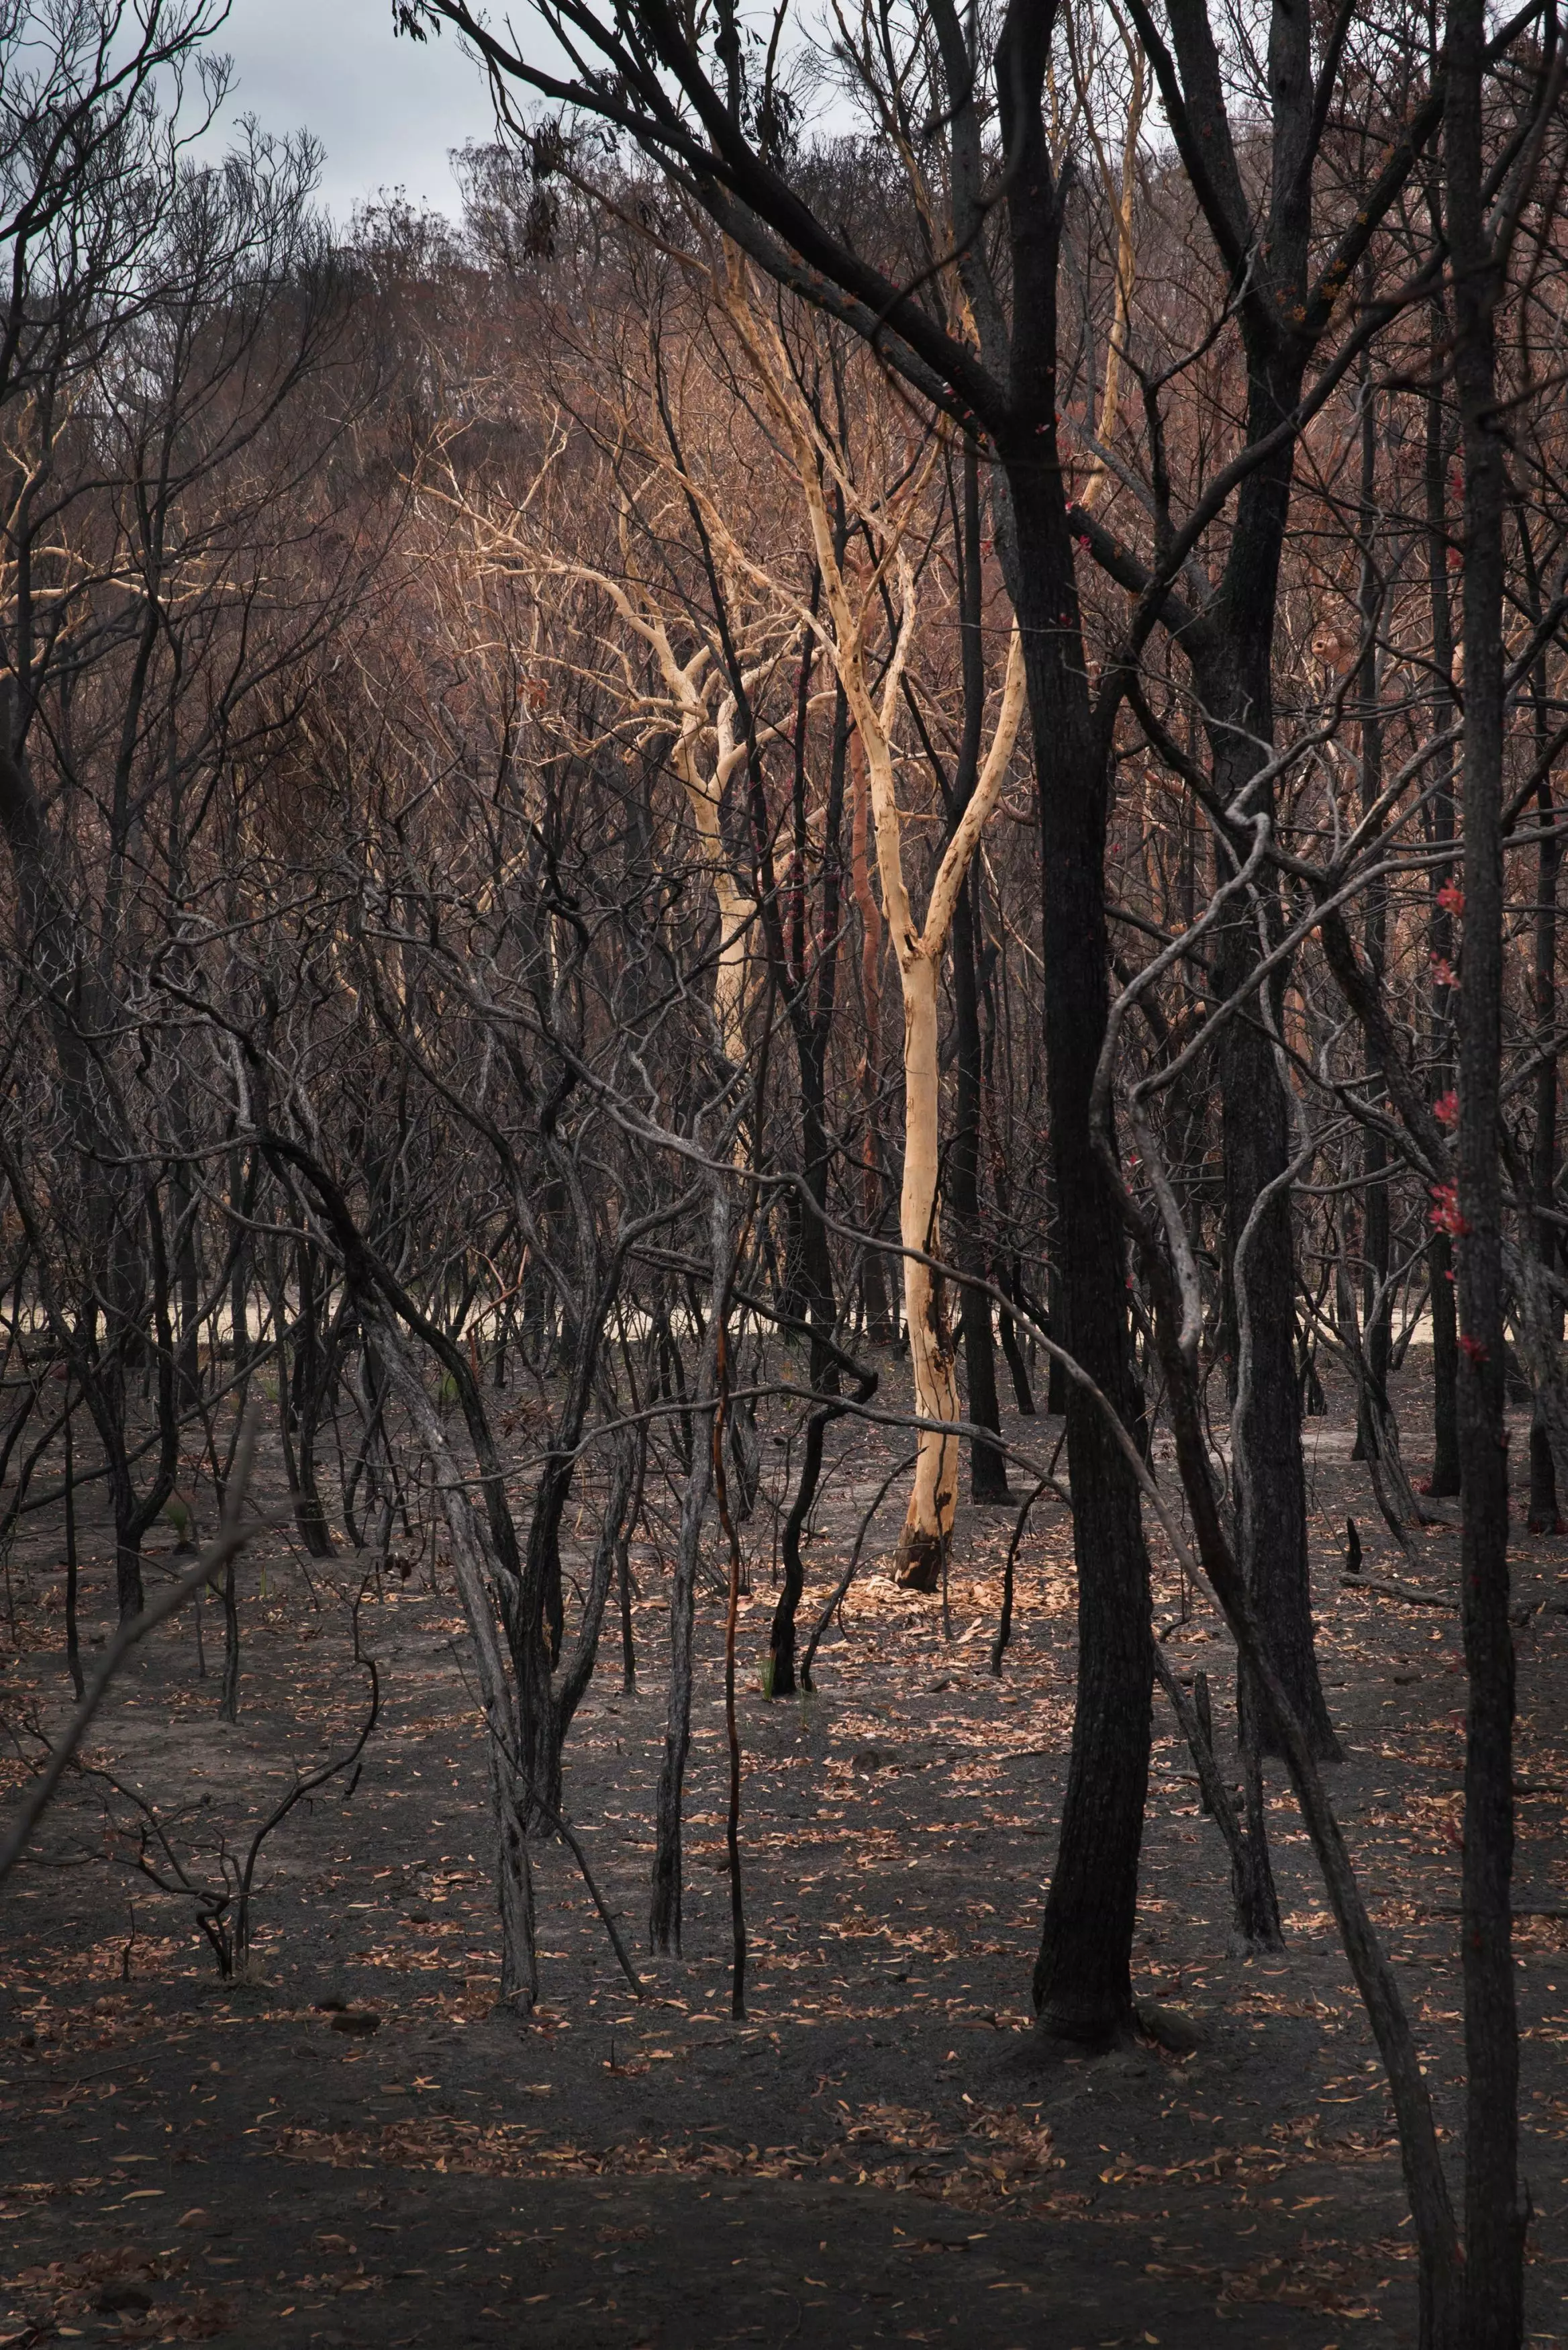 Some pictures showed oddly how the fires charred most trees but left others (